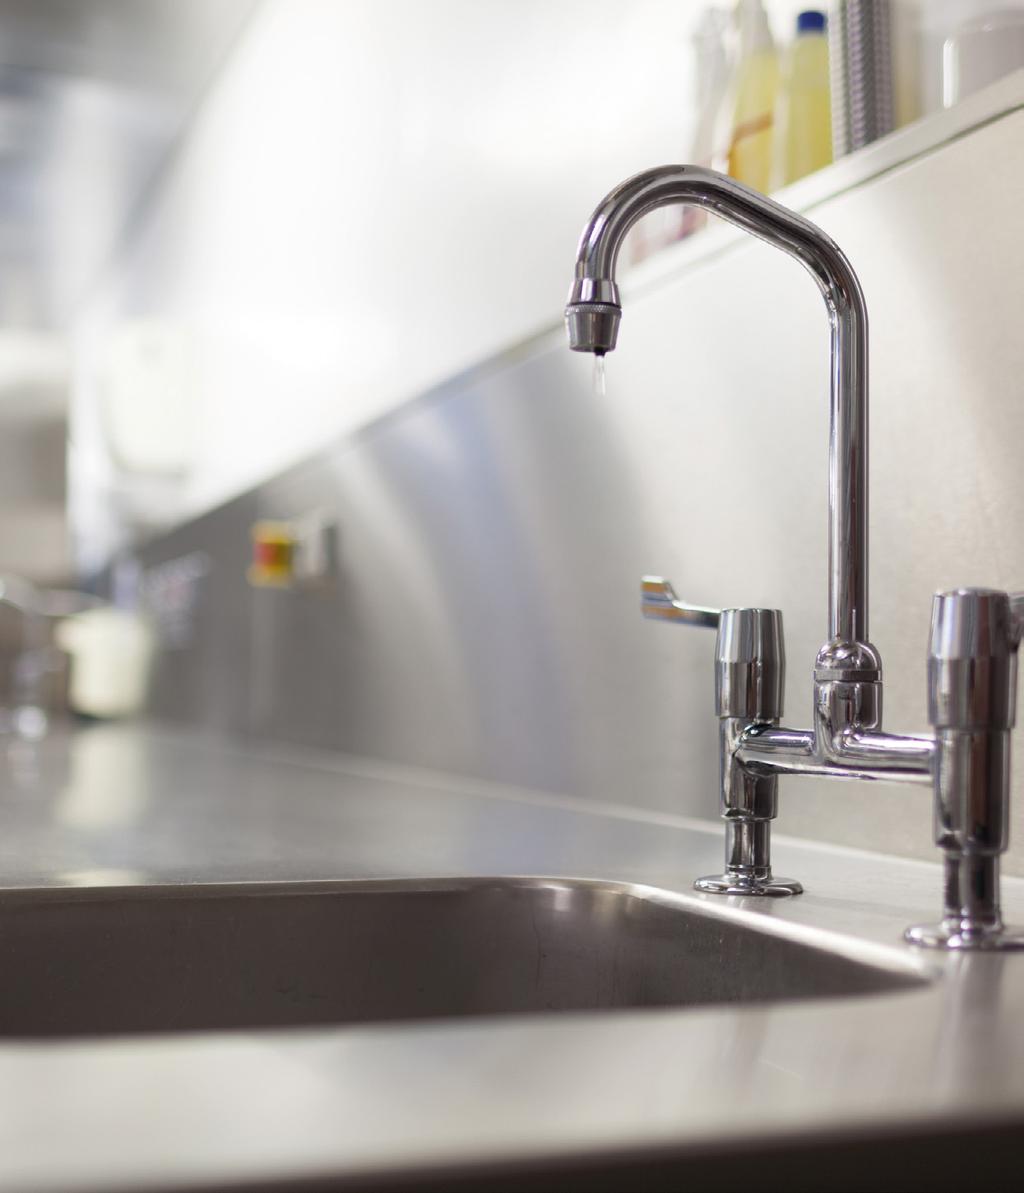 MANUAL BASIN TAPS Choosing the correct style of taps can depend upon multiple factors including style, finish and functionality.